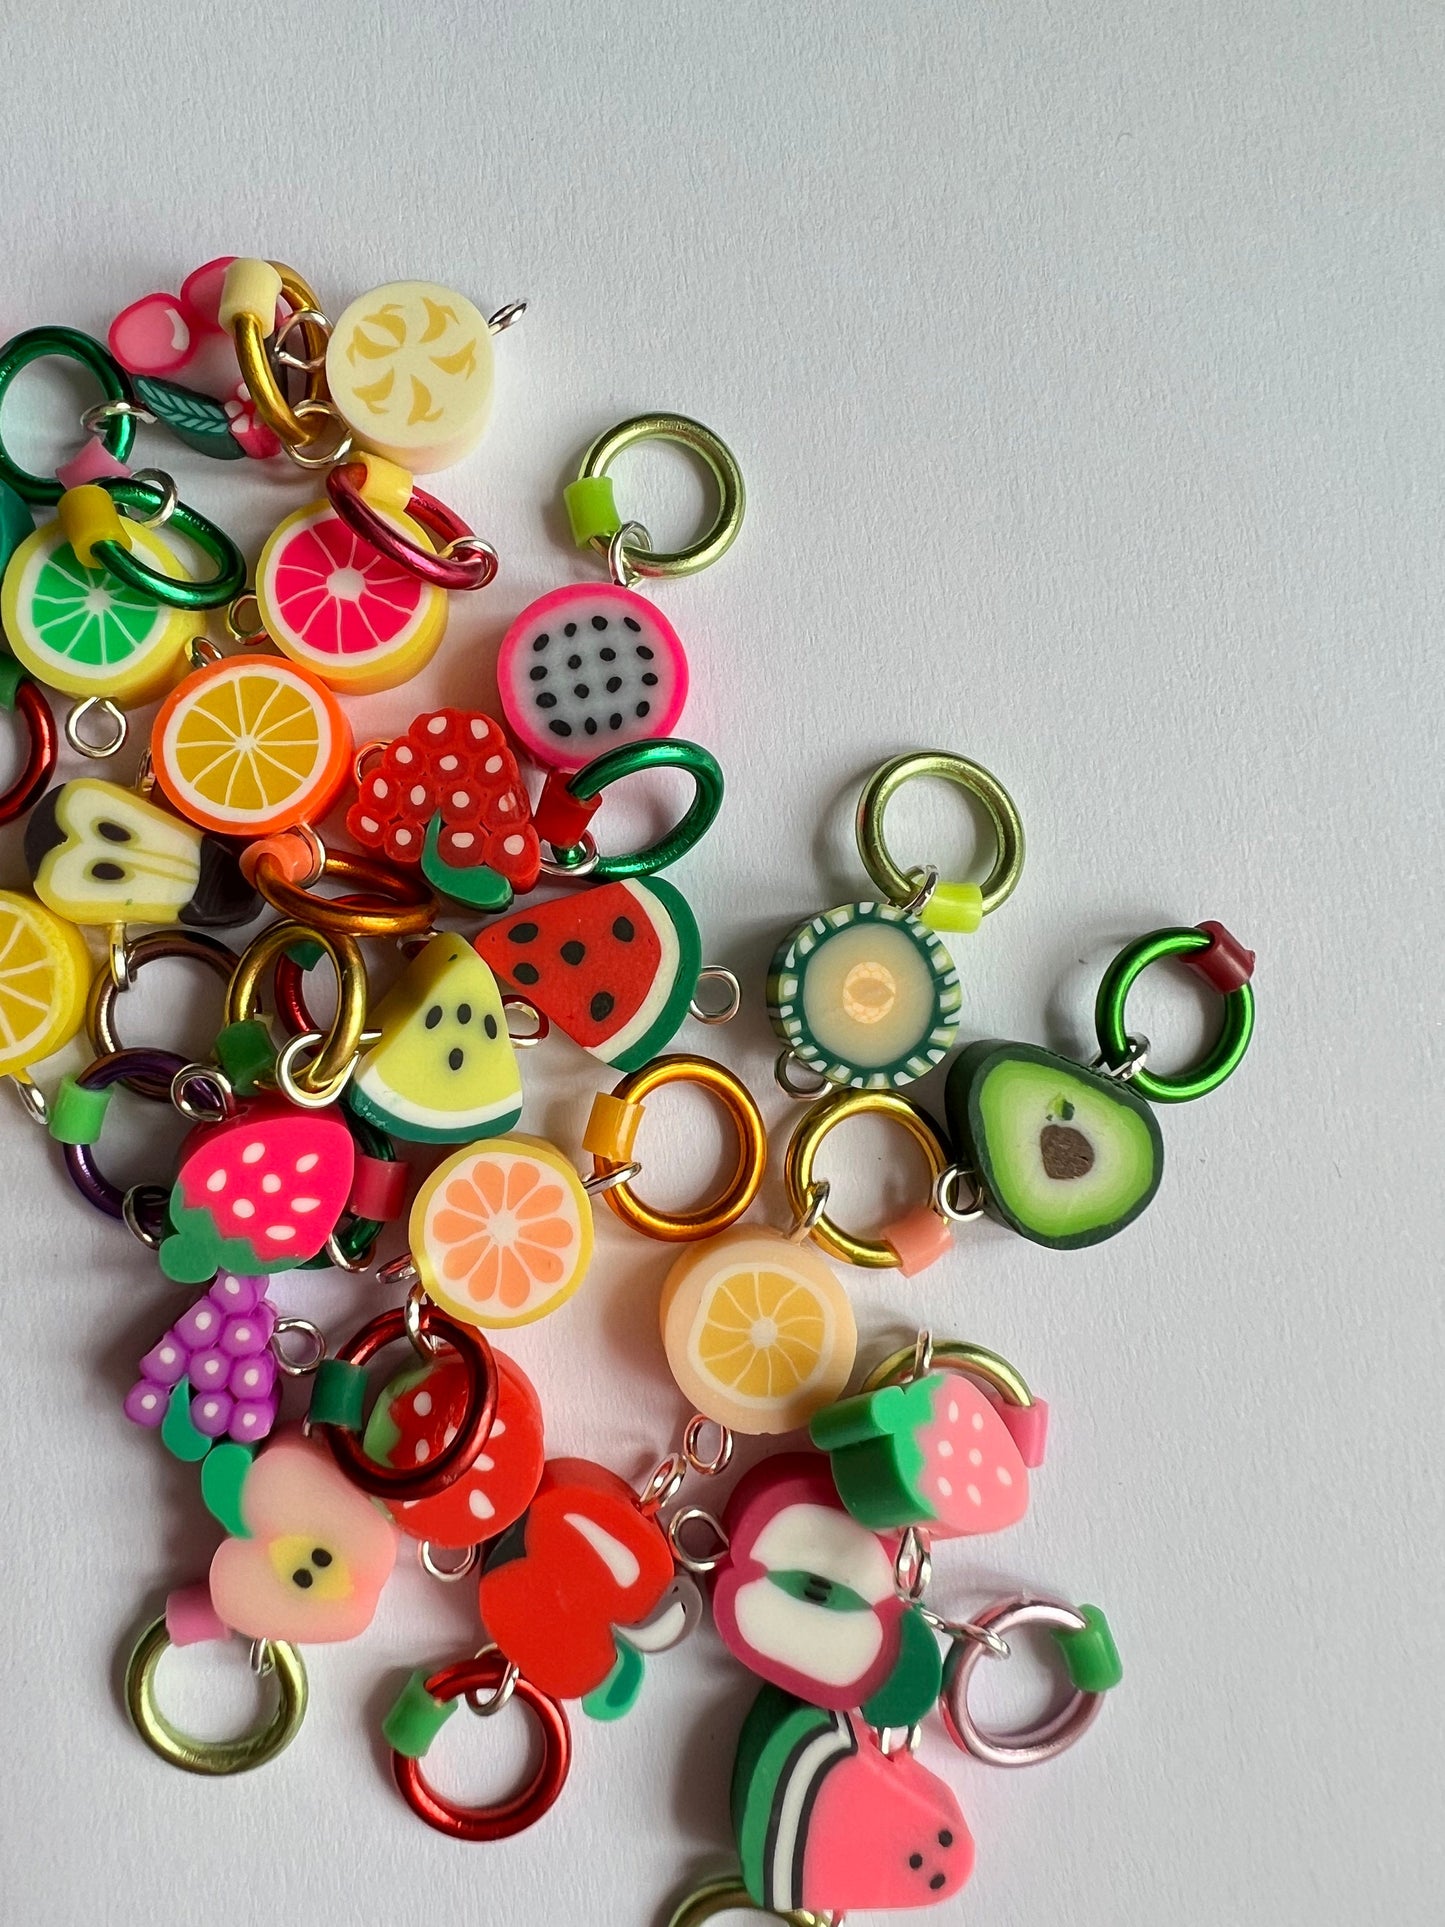 Fruit-Themed Knitting Stitch Markers - Fruit Charms - Fruit Salad Mix